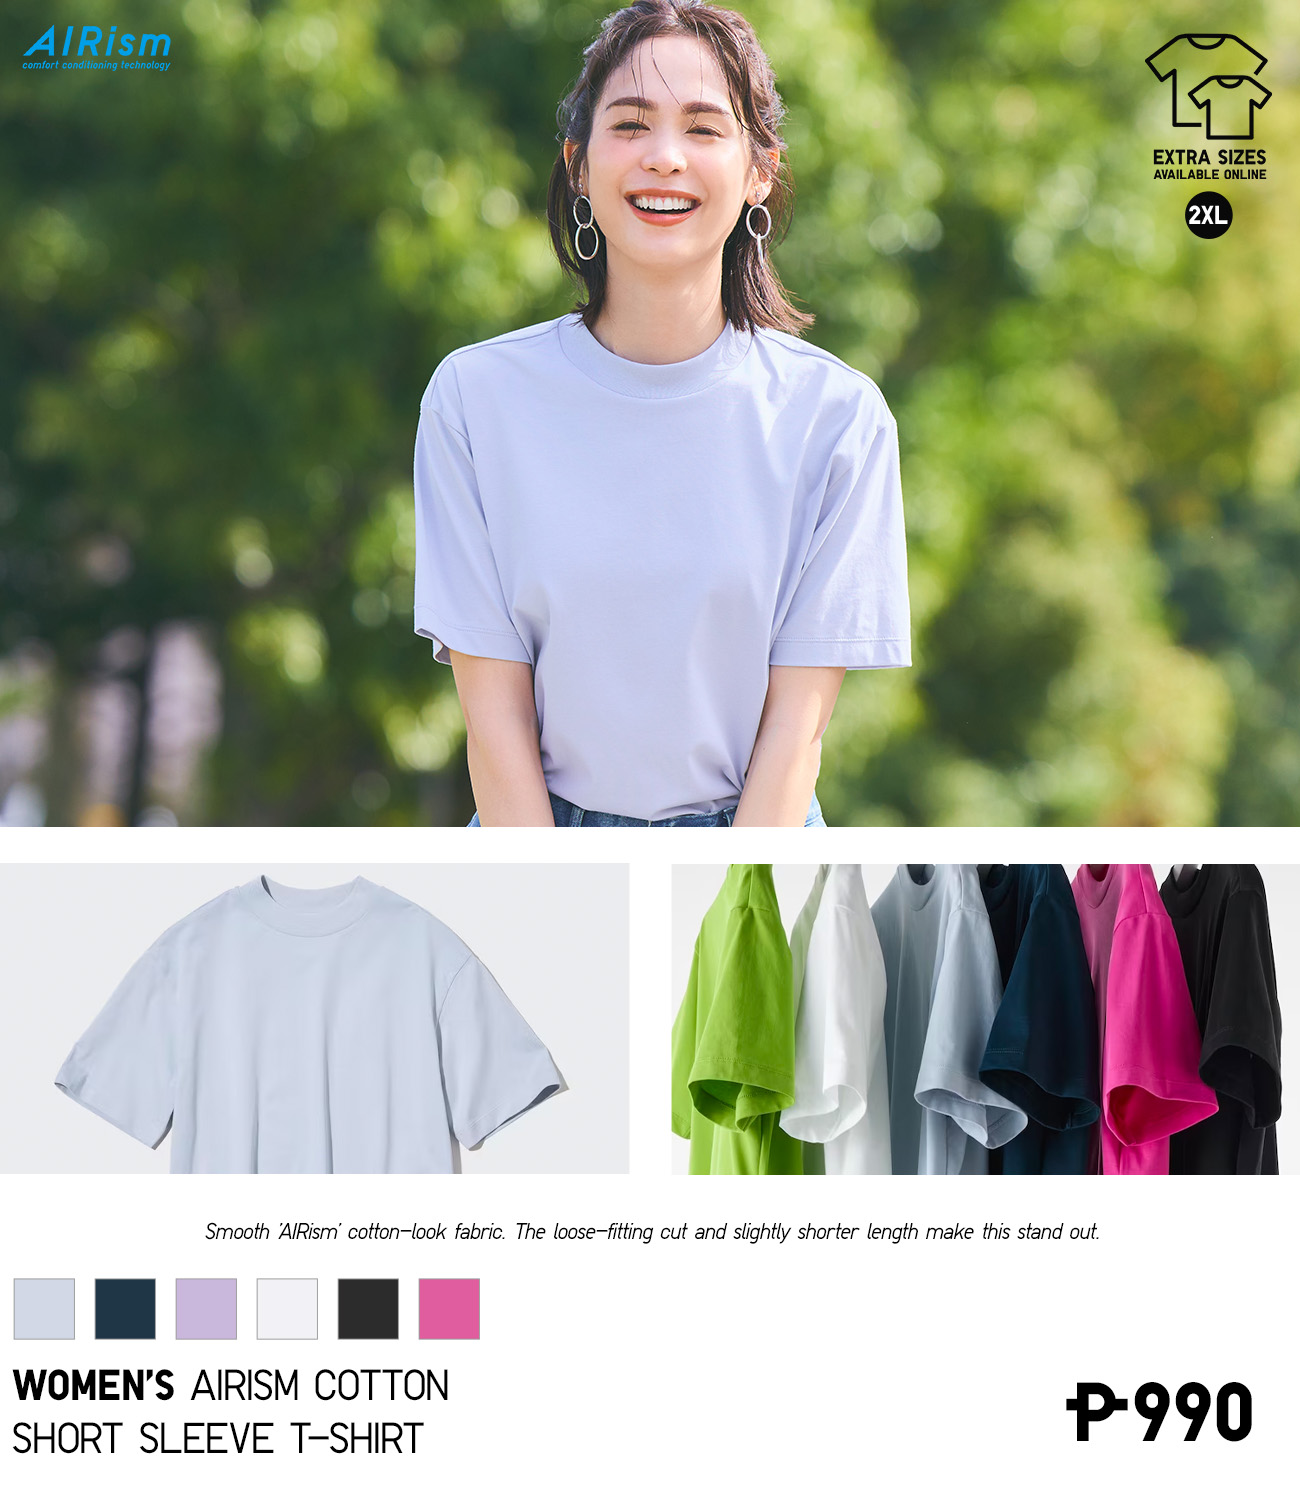 Uniqlo AIRism Is Meant to Keep You Cooler - What is Uniqlo AIRism